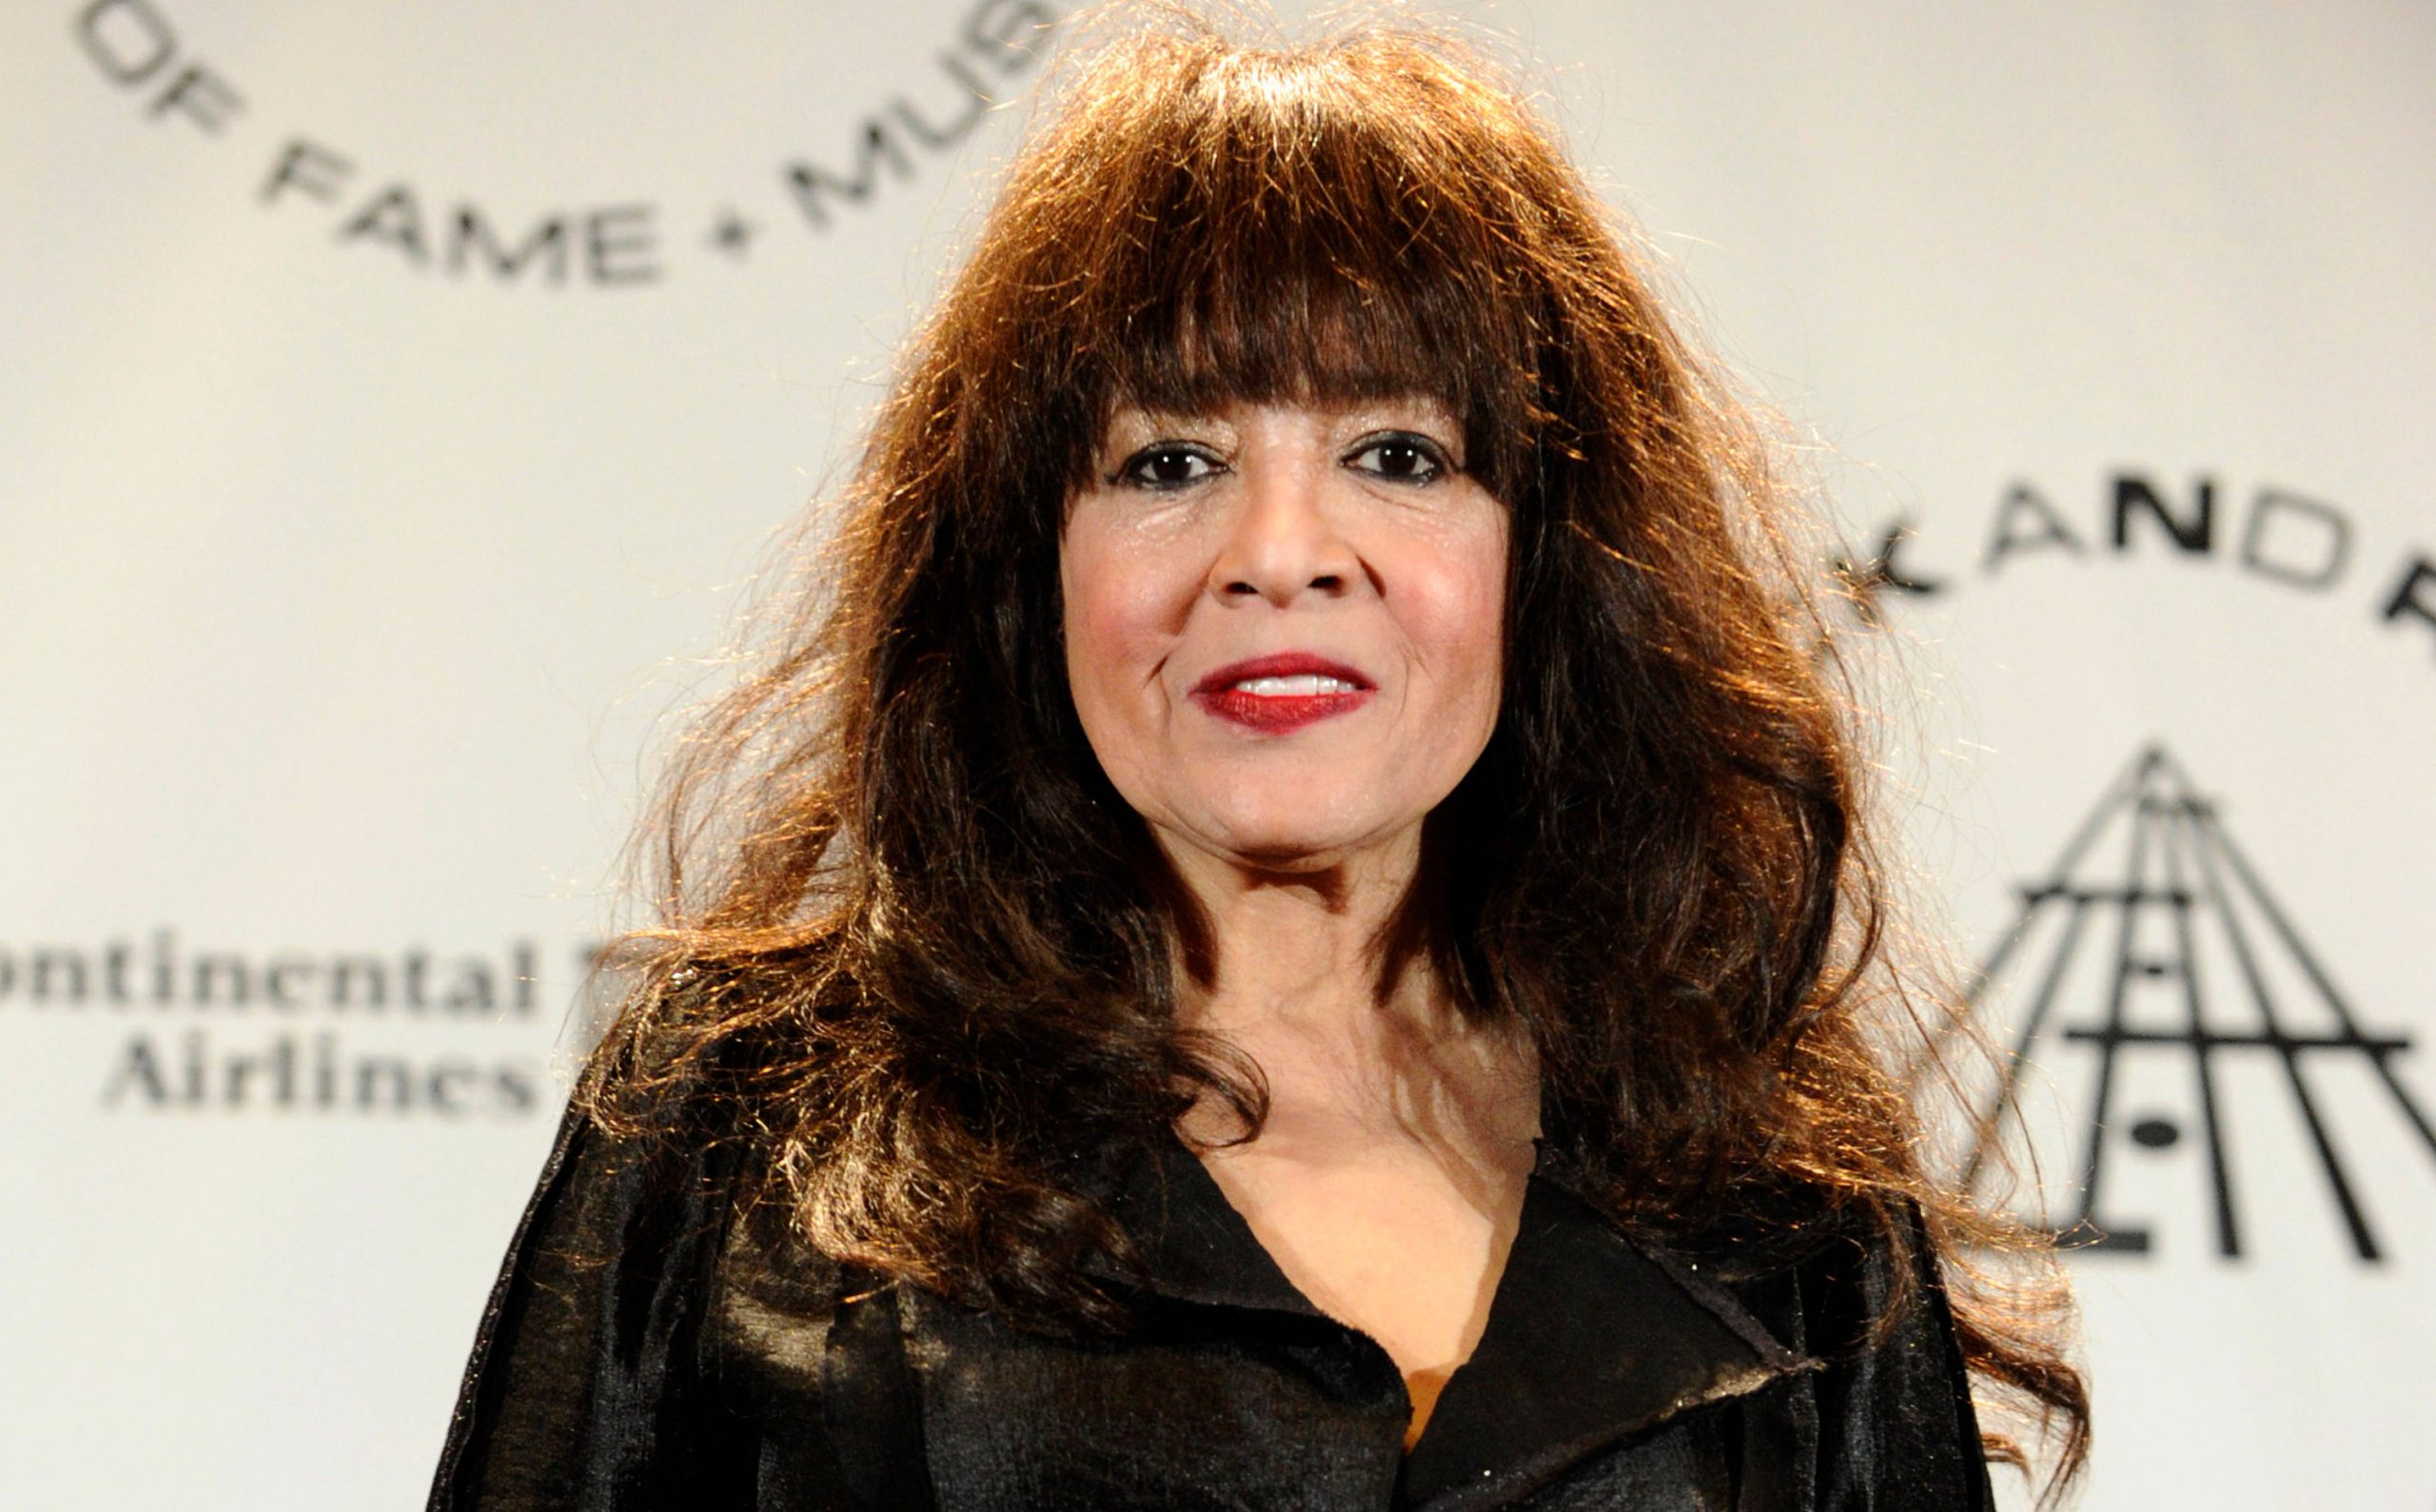 What is Ronnie Spector’s net worth?